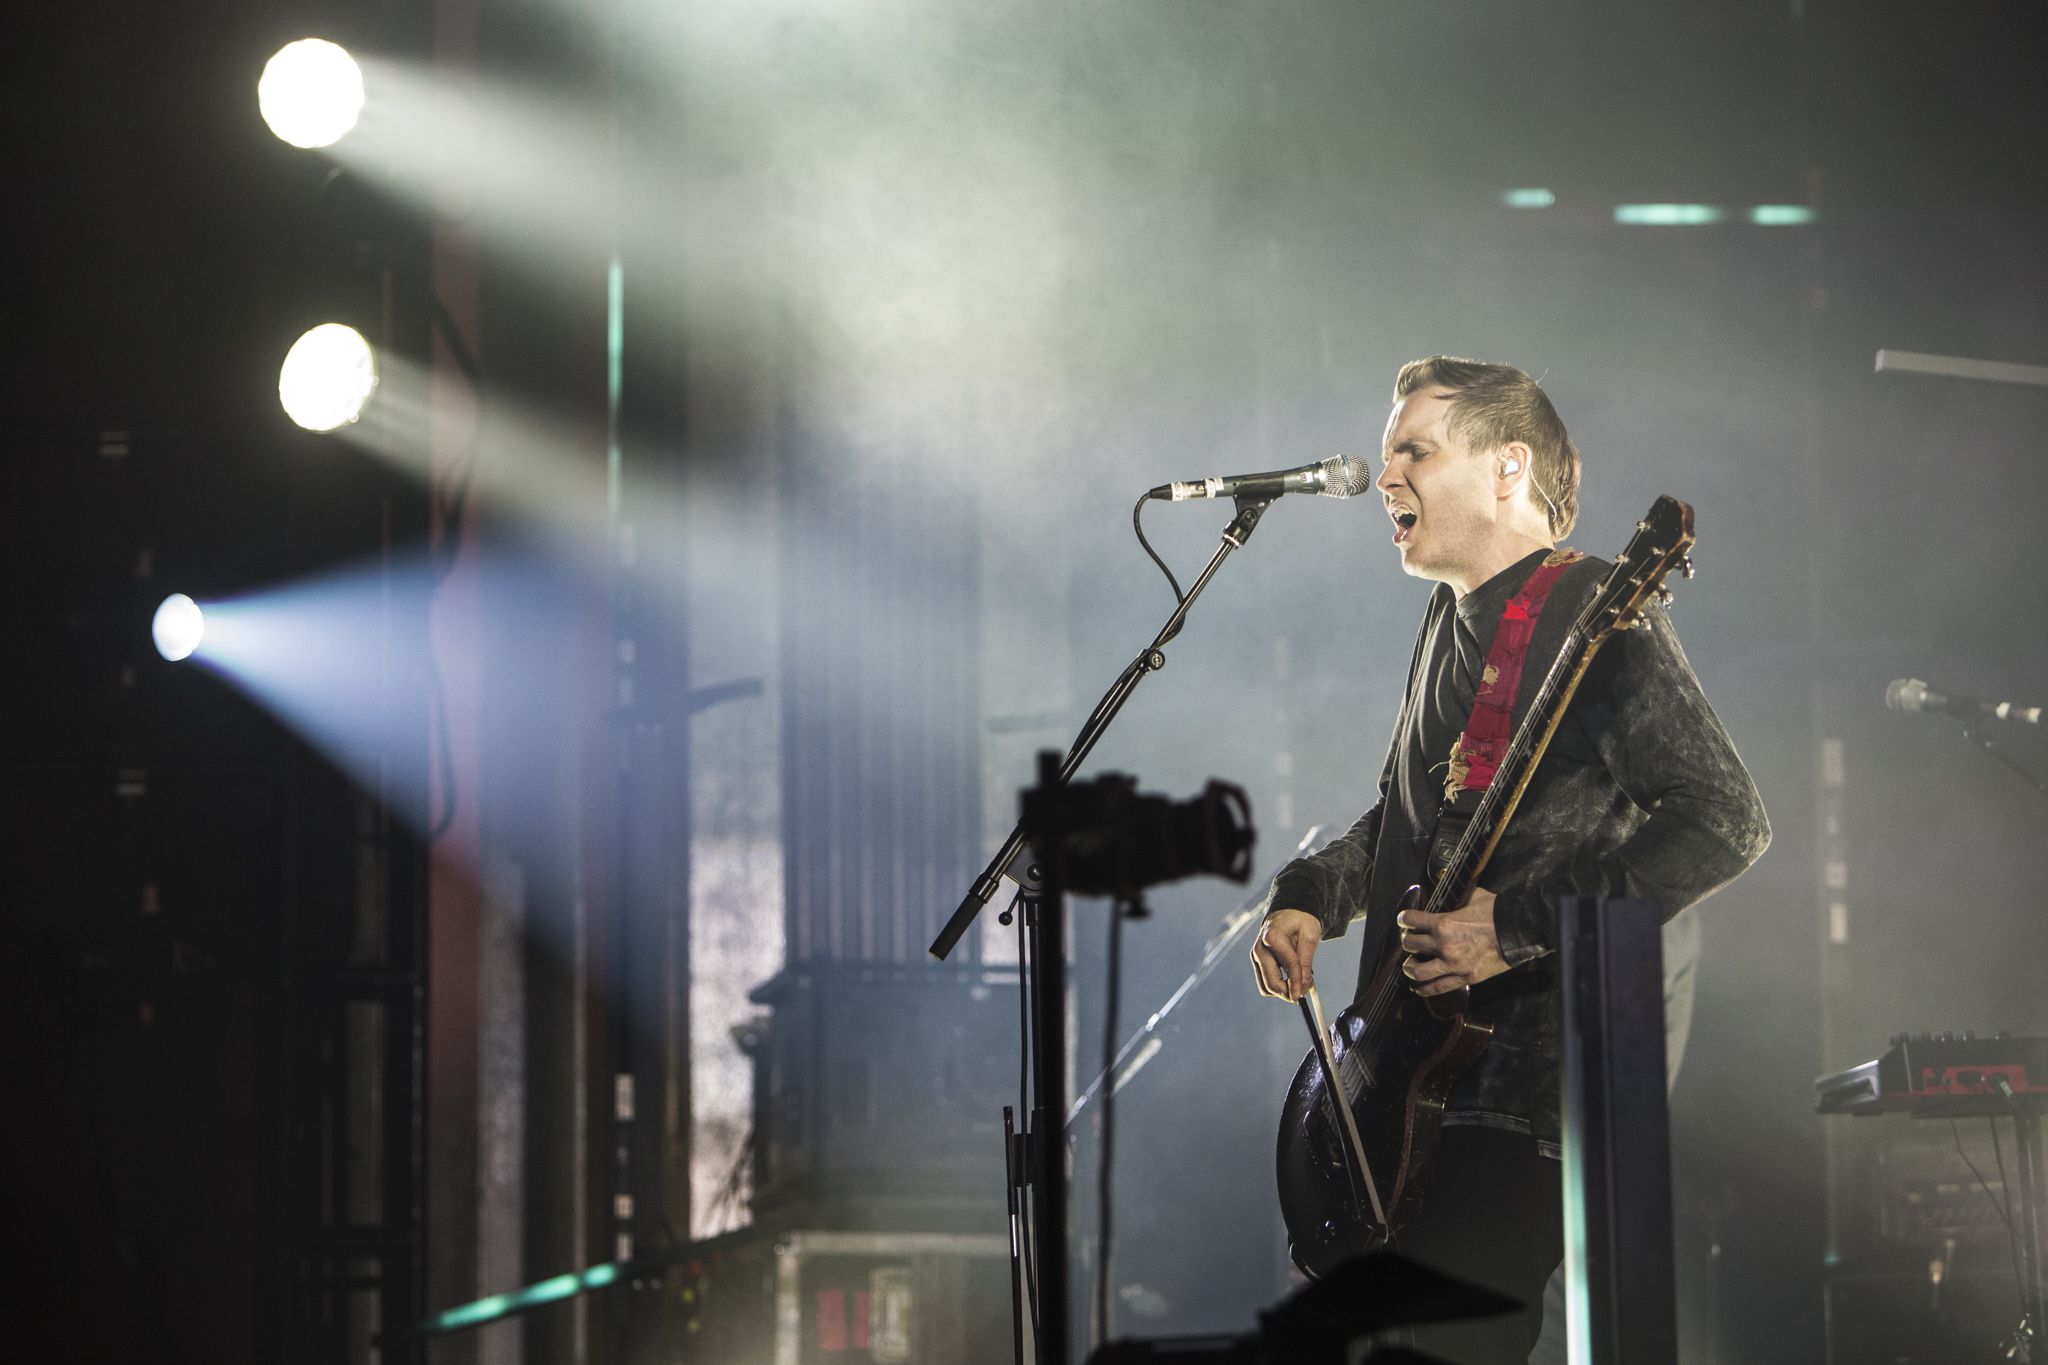 sigur ros 9 Live Review: Sigur Rós at the Fox Theater in Pomona (4/10)